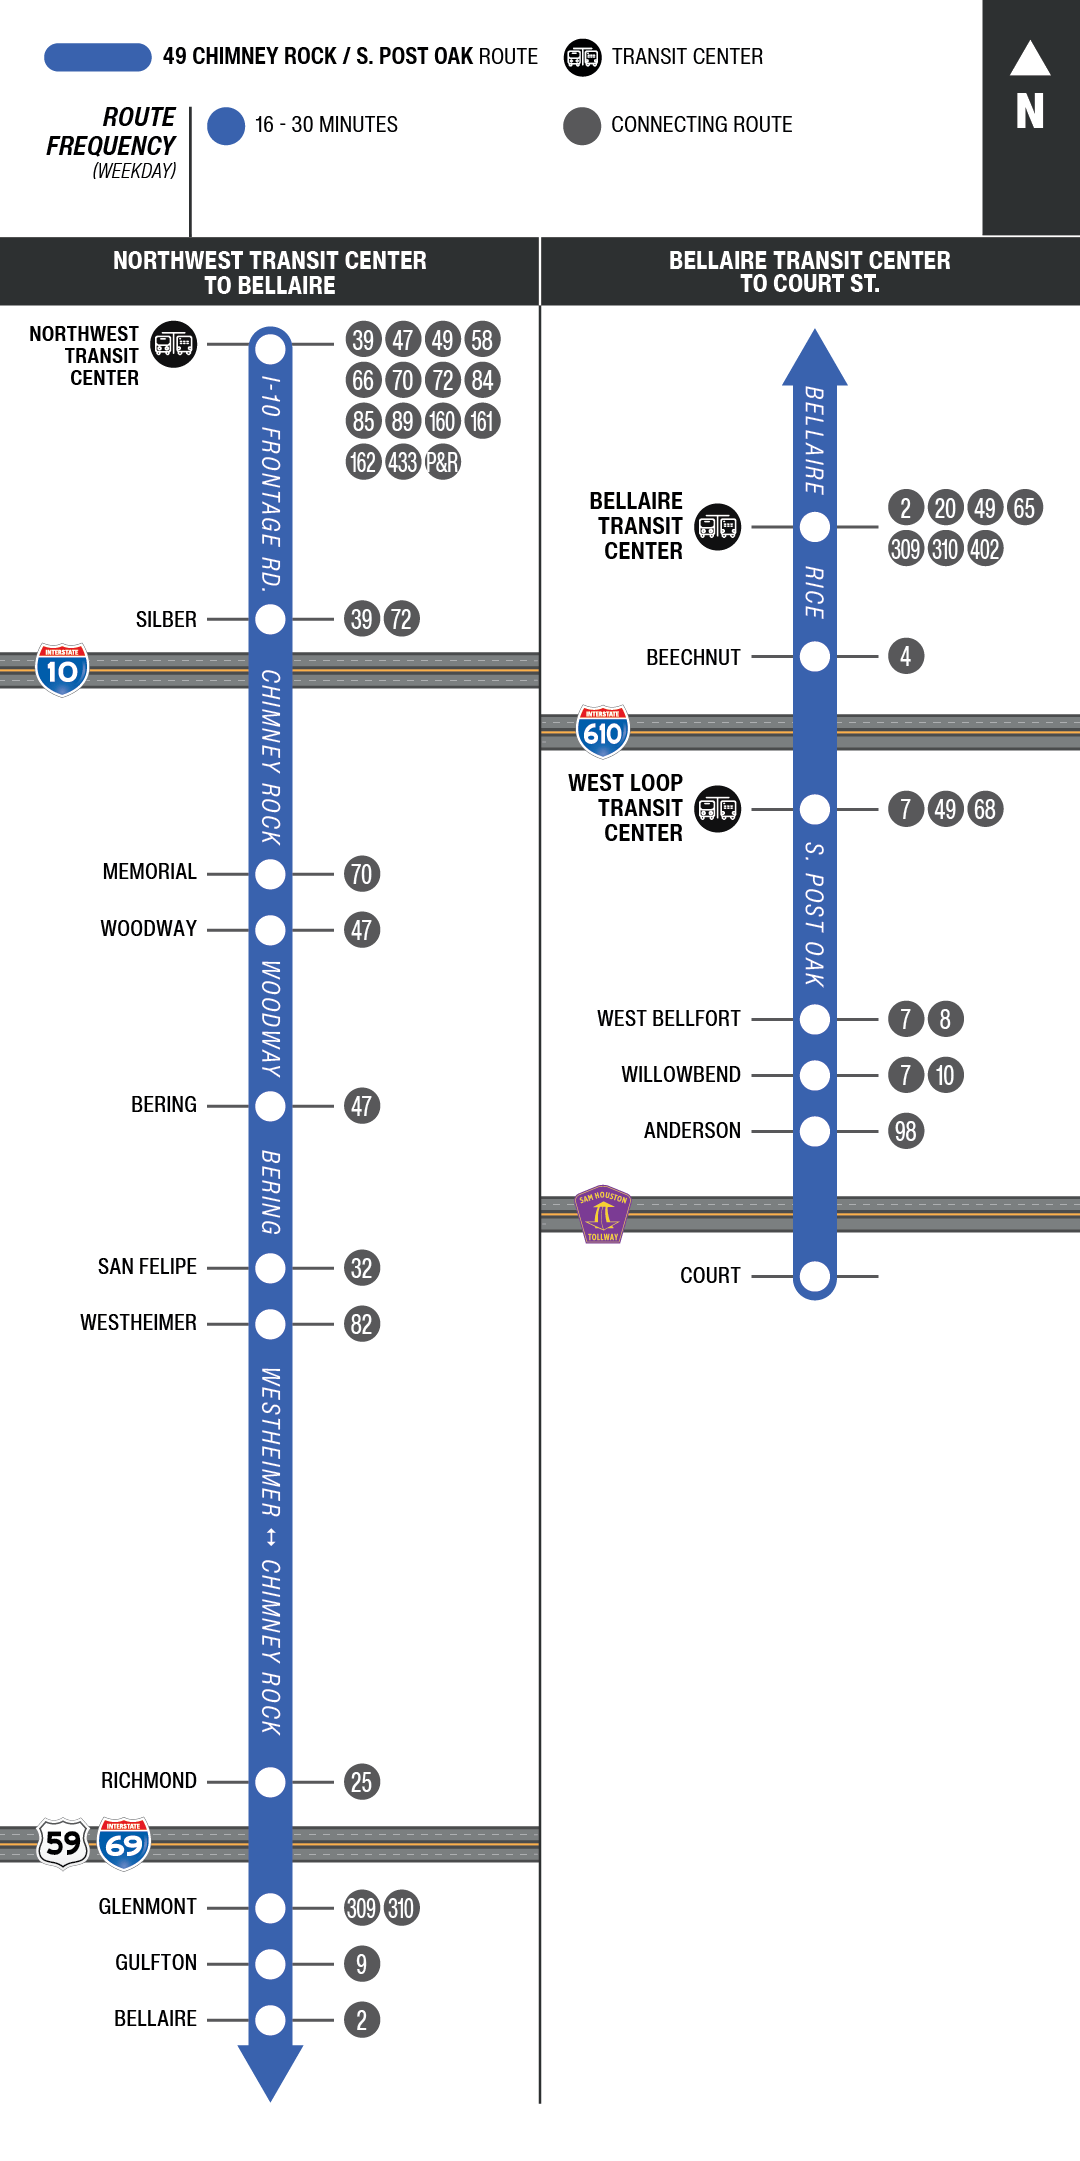 Route map for 49 Chimney Rock / S. Post Oak bus